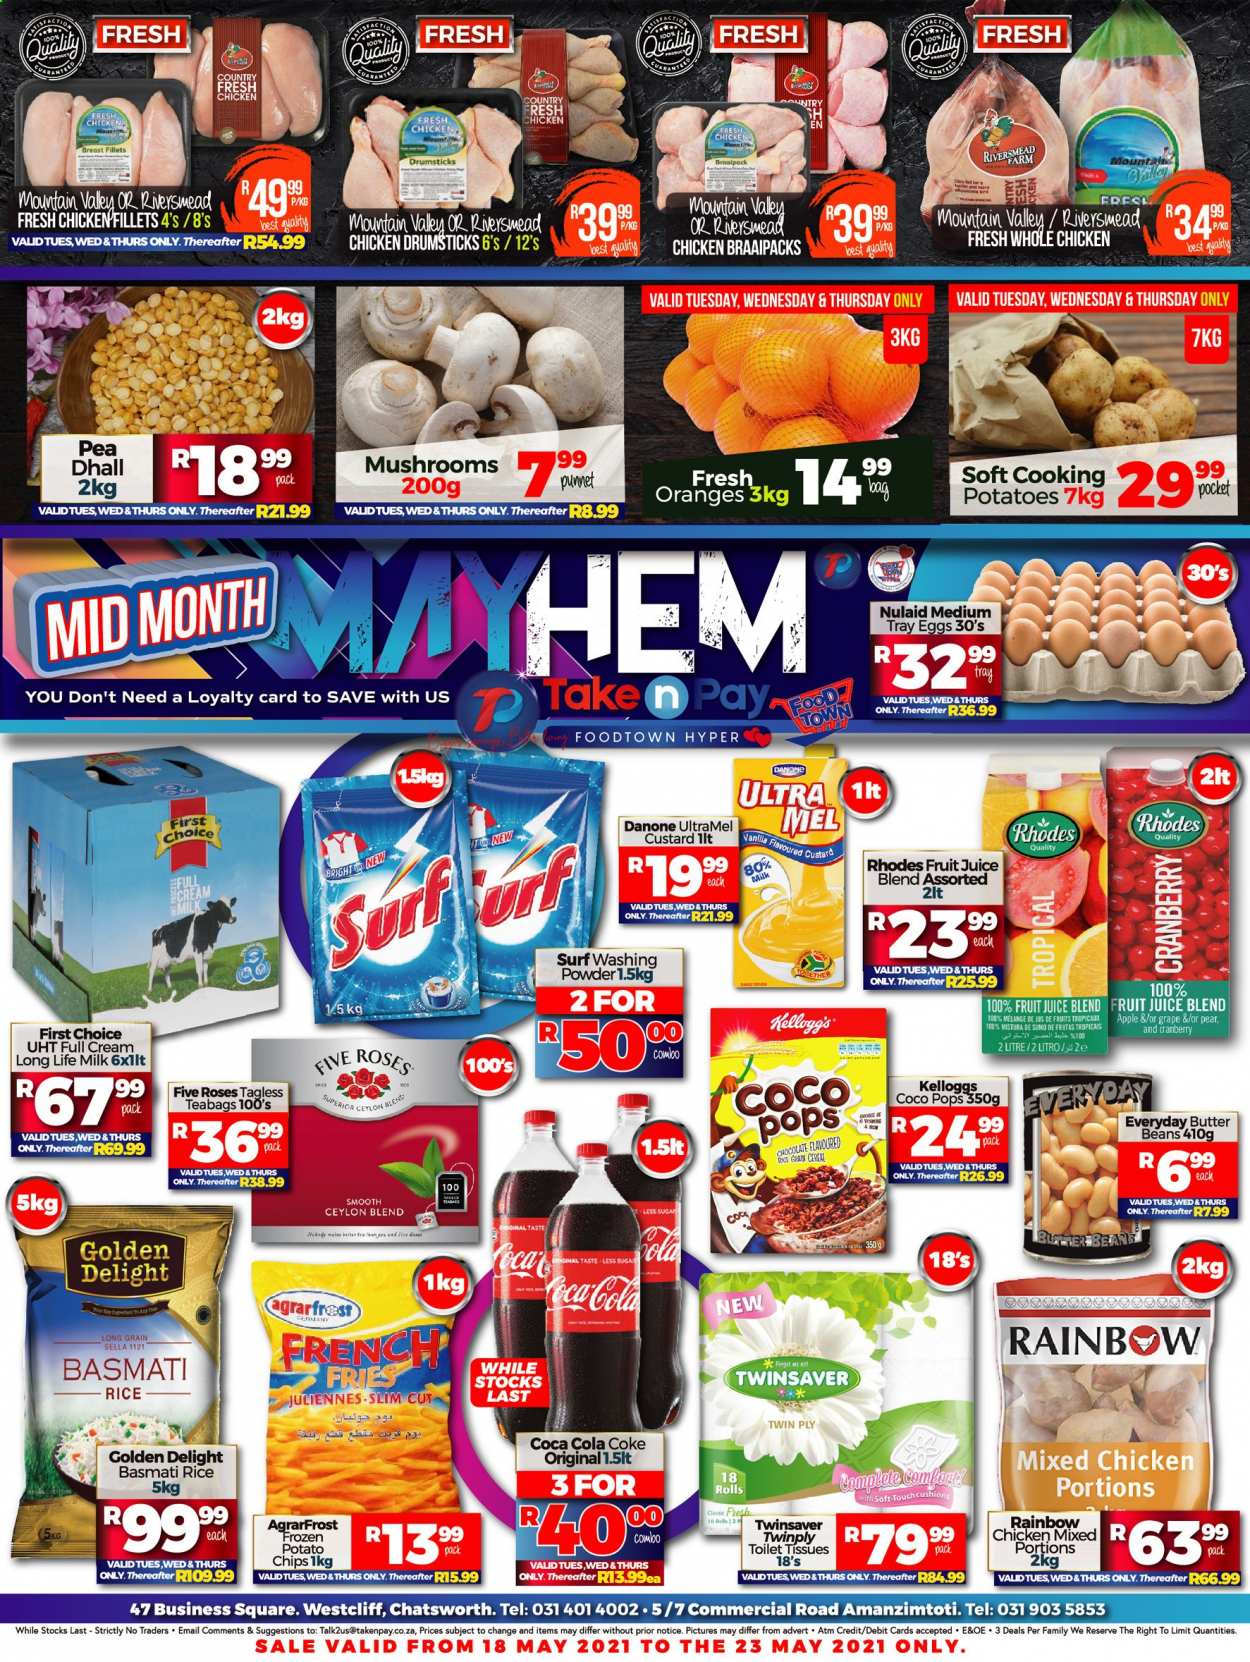 Take n Pay specials - 05.18.2021 - 05.23.2021. 